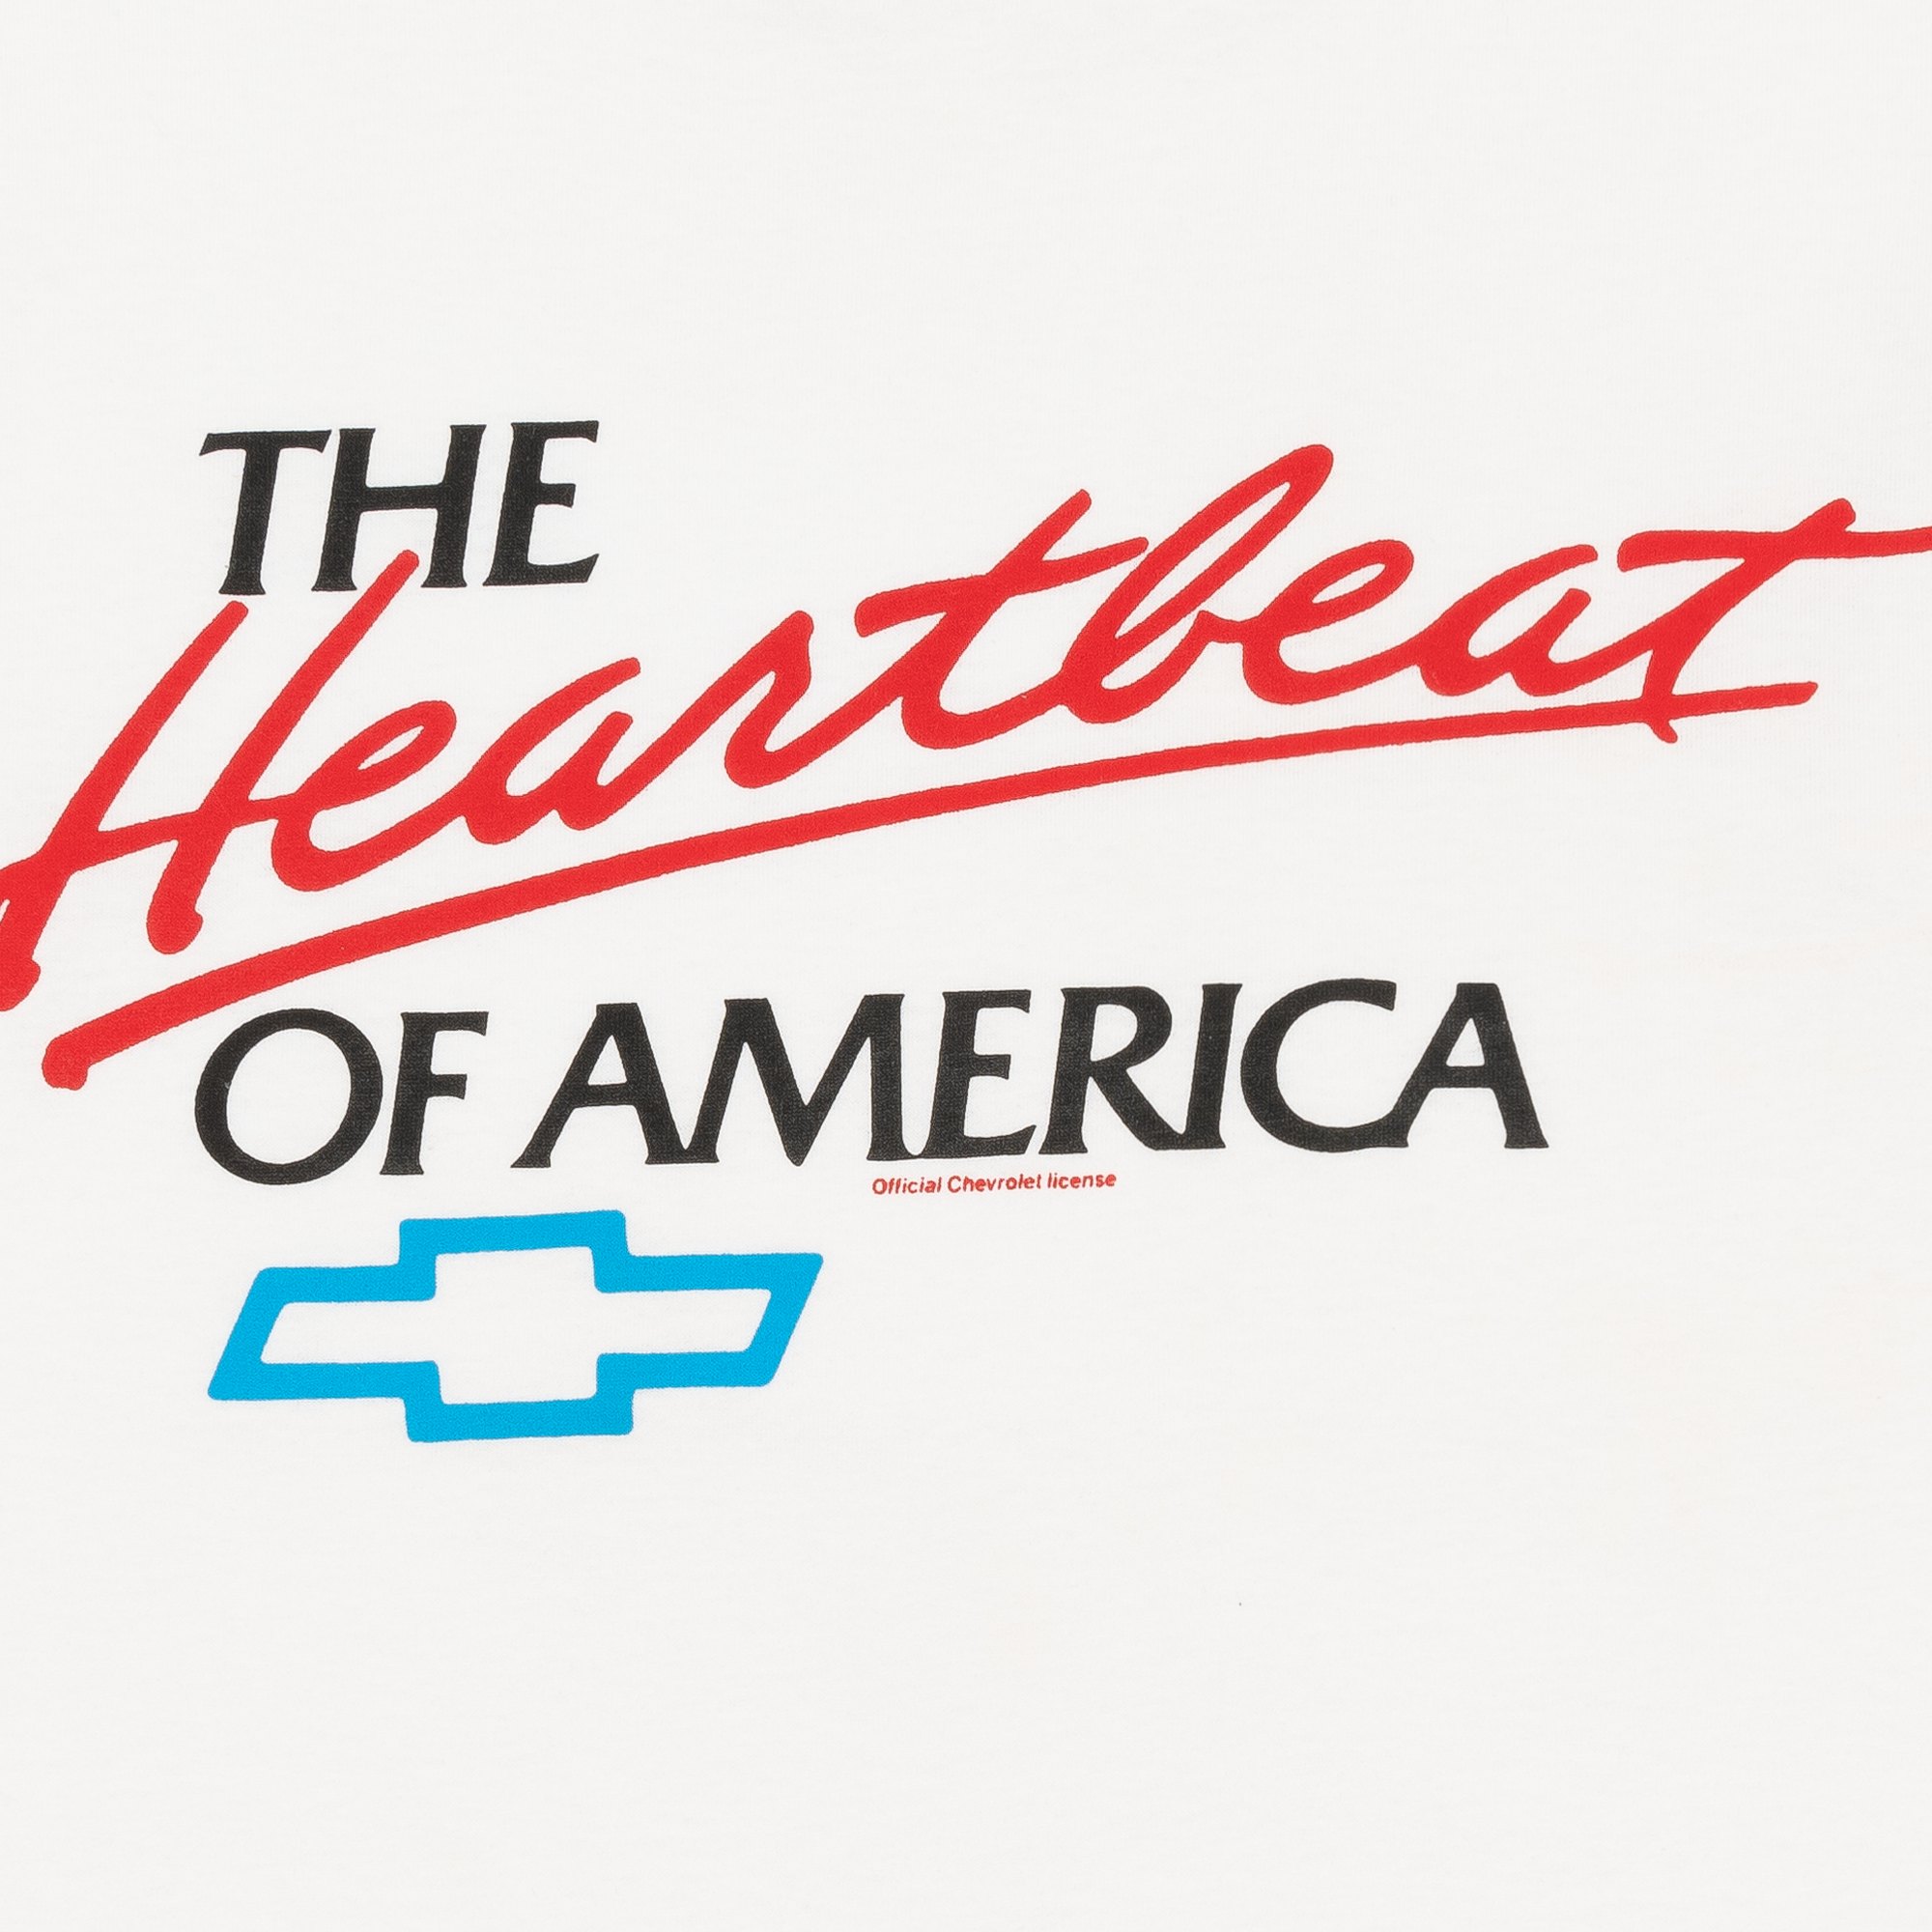 Chevrolet The Heartbeat of America 1990s Advertising Tee White-PLUS